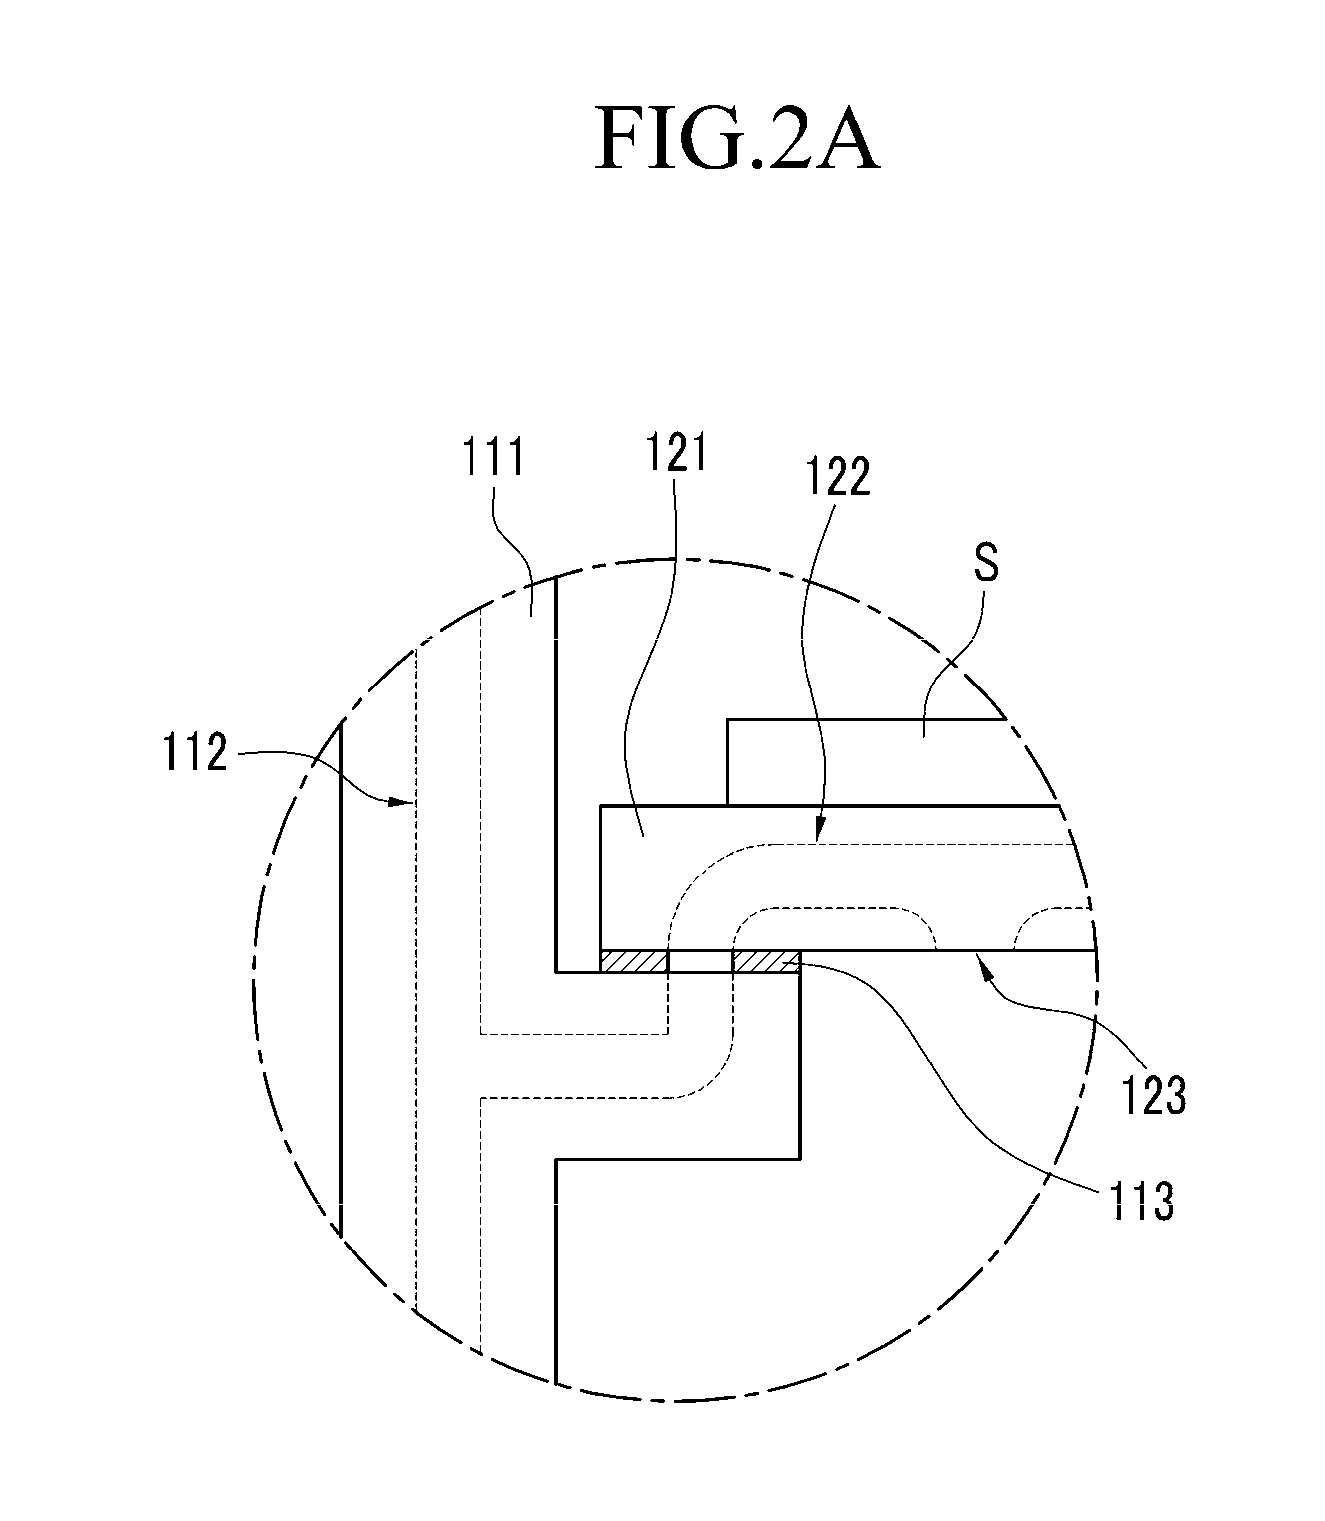 Apparatus for Processing Substrate